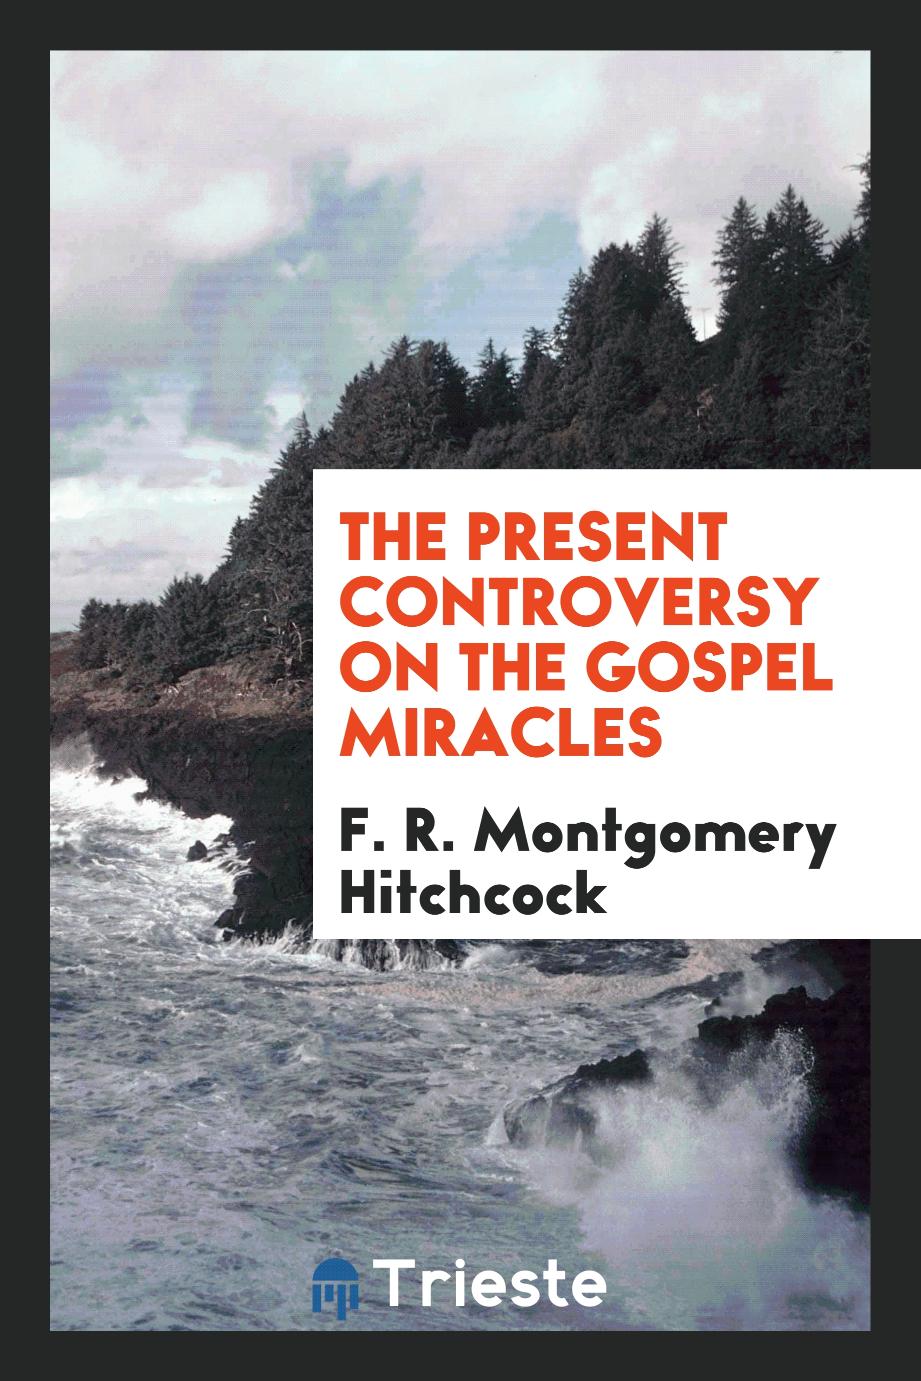 The present controversy on the gospel miracles